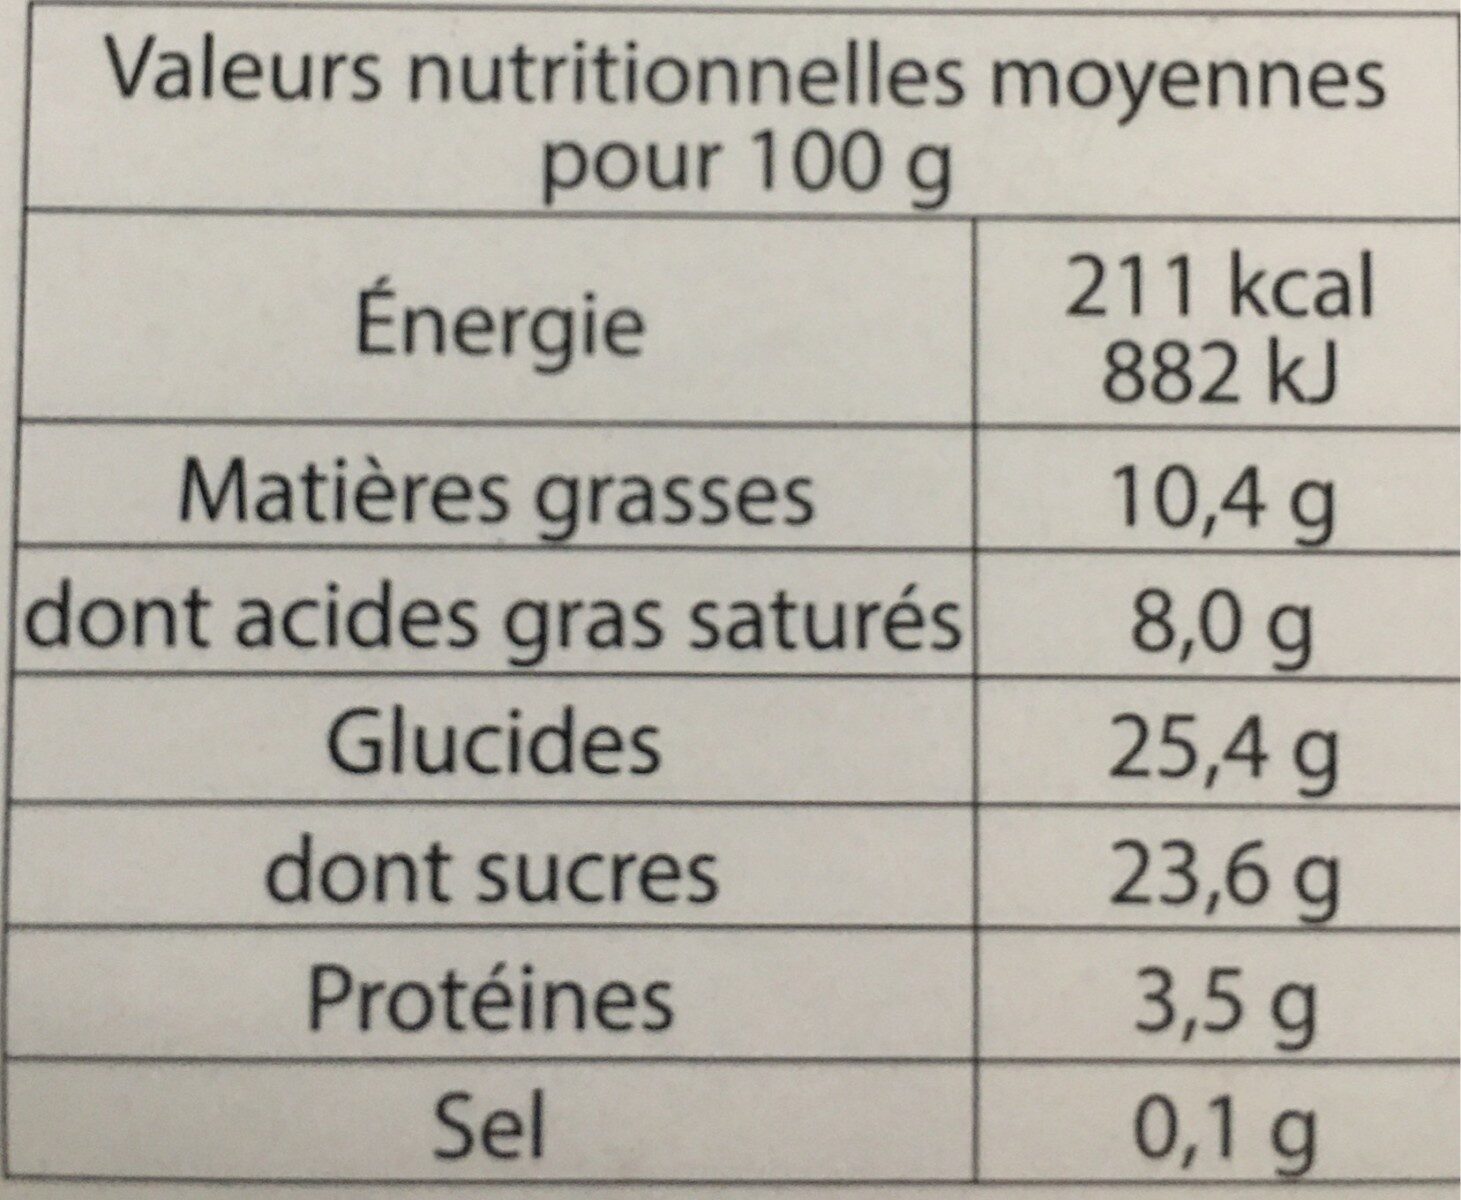 Glace menthe forte - Nutrition facts - fr